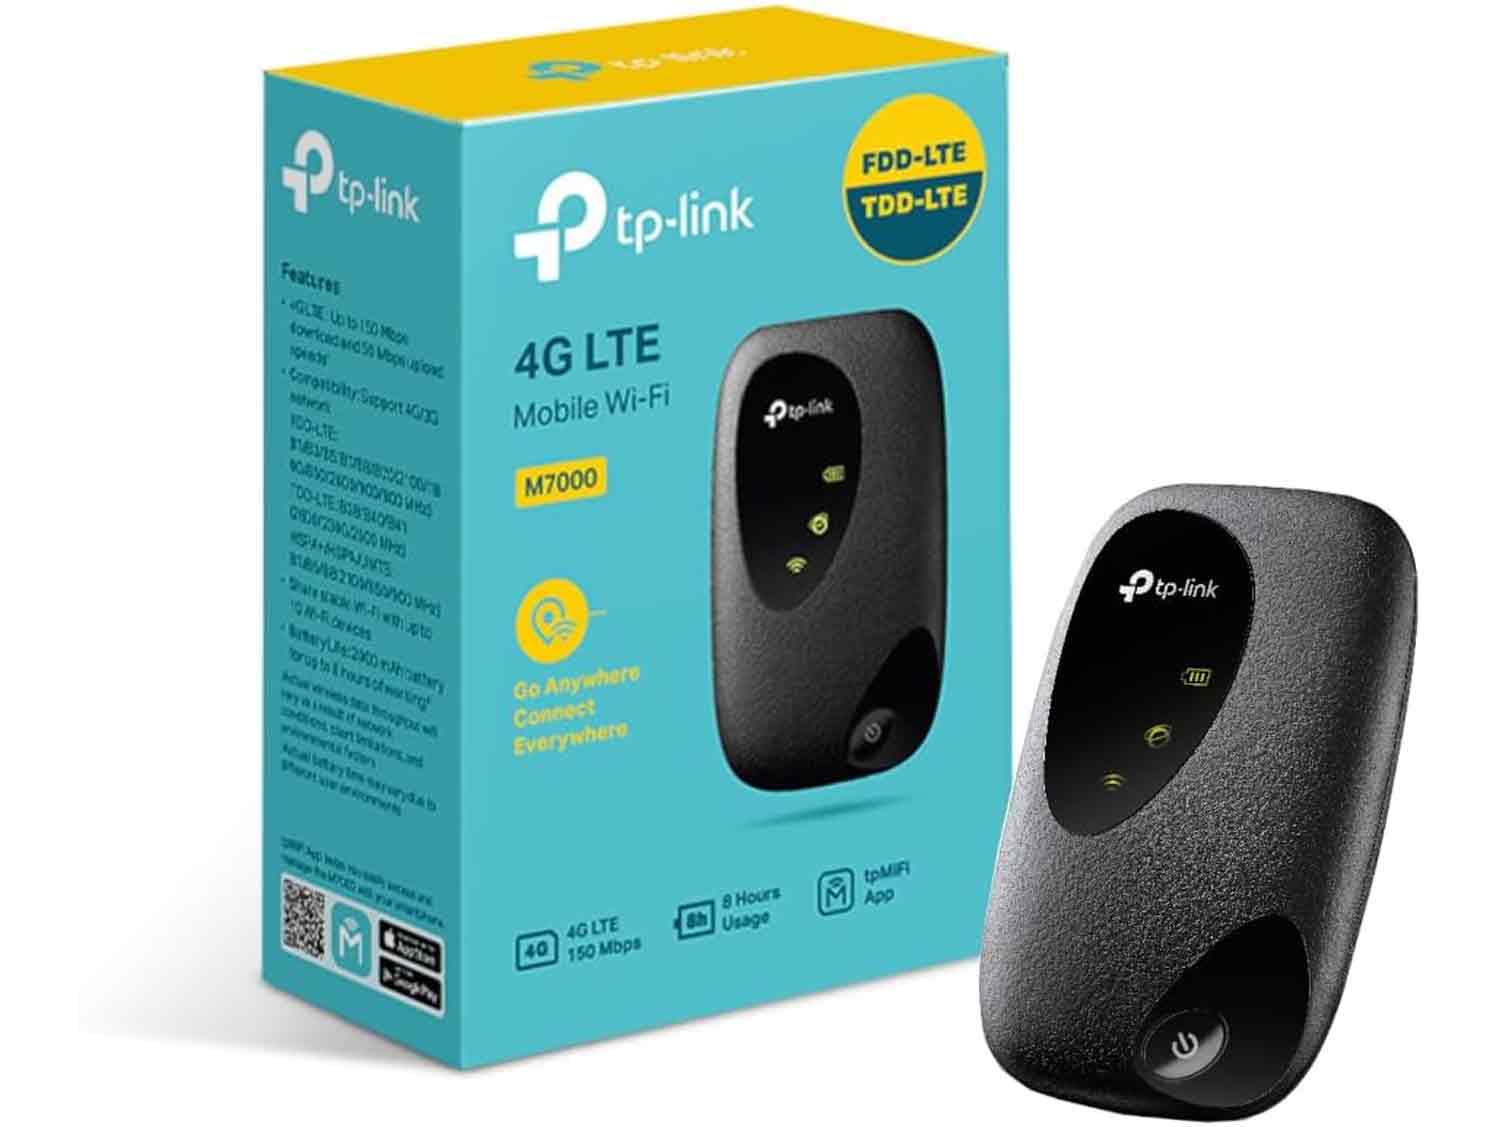 TP-Link 4G LTE Mobile Wi-Fi Router M7200